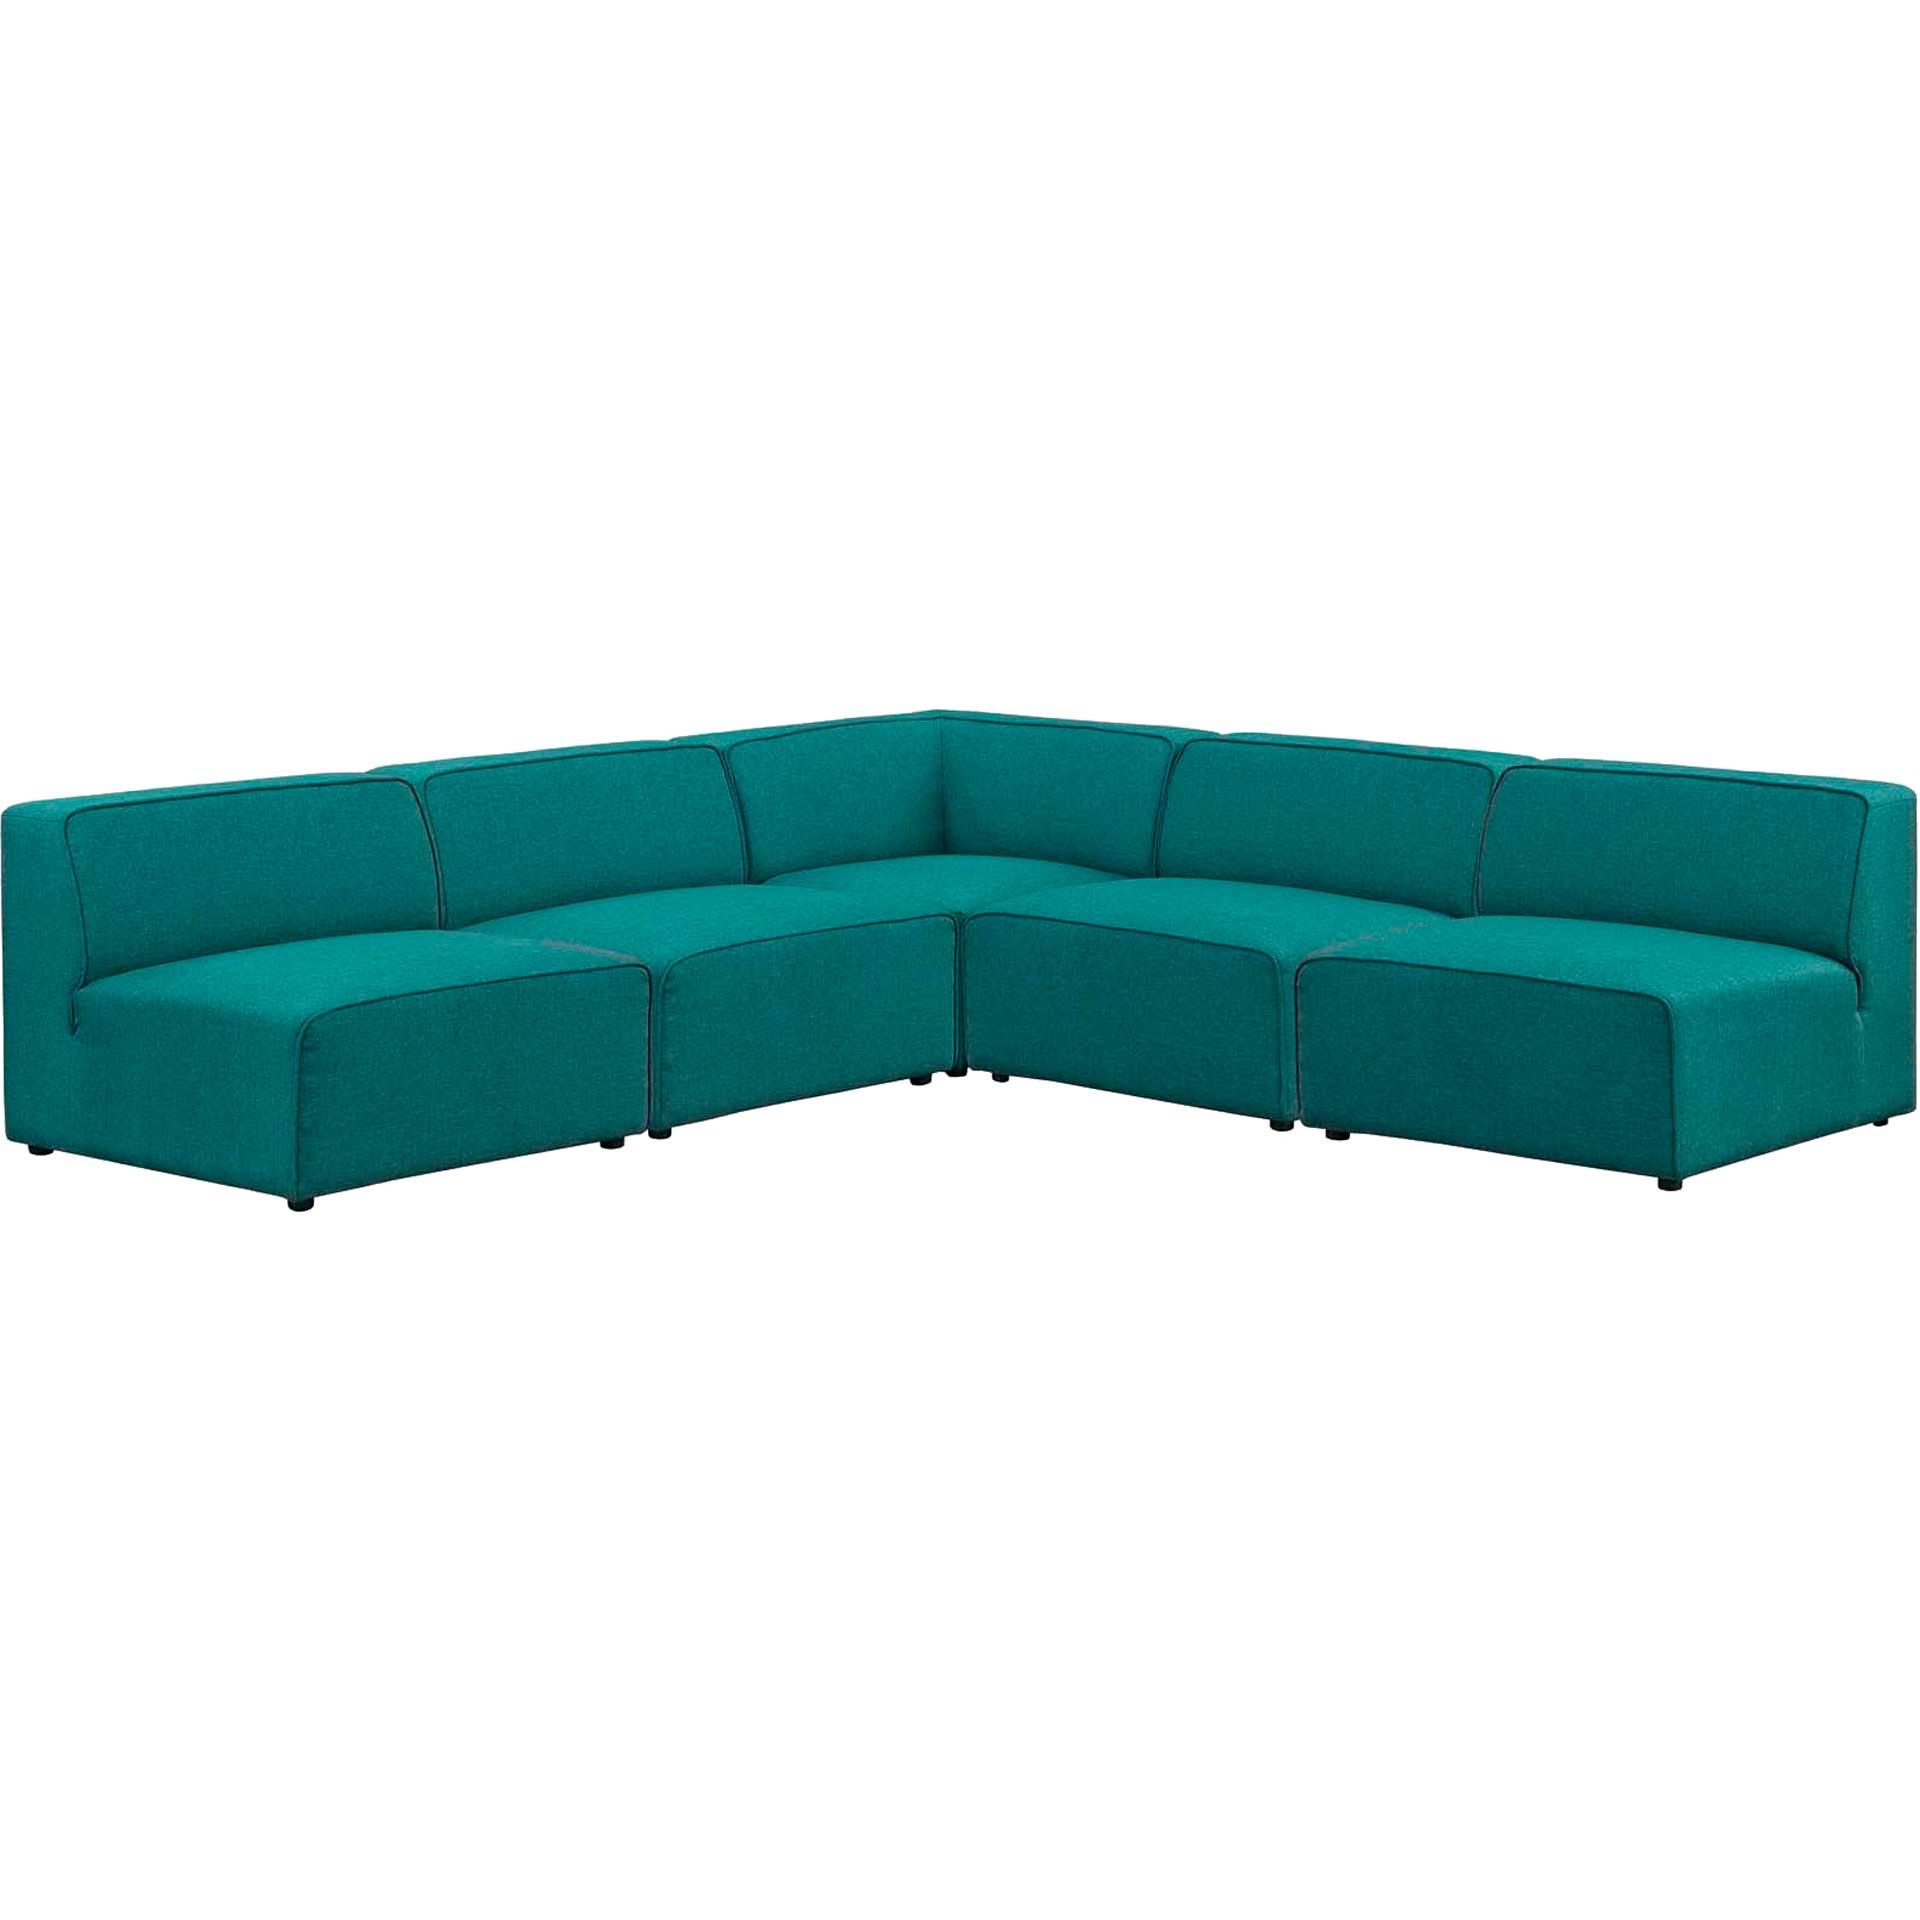 Maisie 5 Piece L-Shaped Armless Sectional Sofa Teal